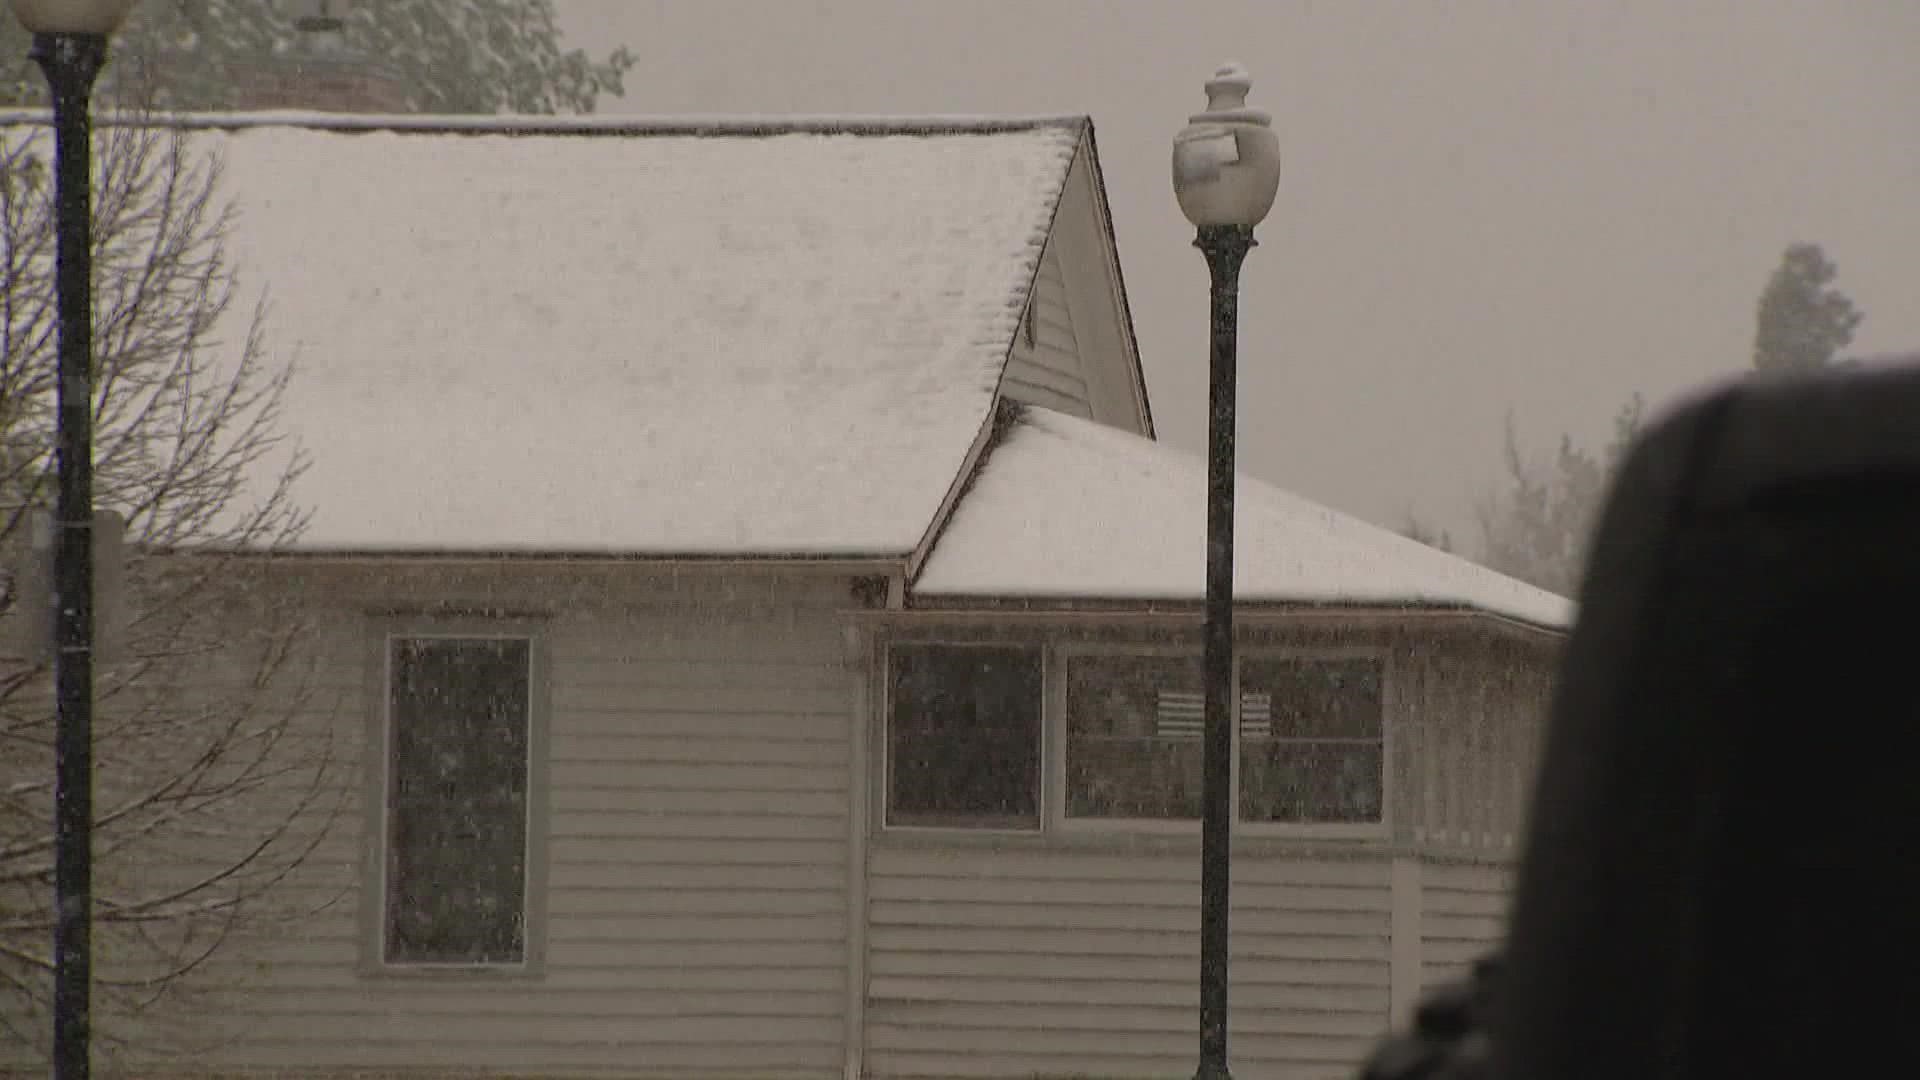 Roofers are expecting to be busy after the wet spring snow.